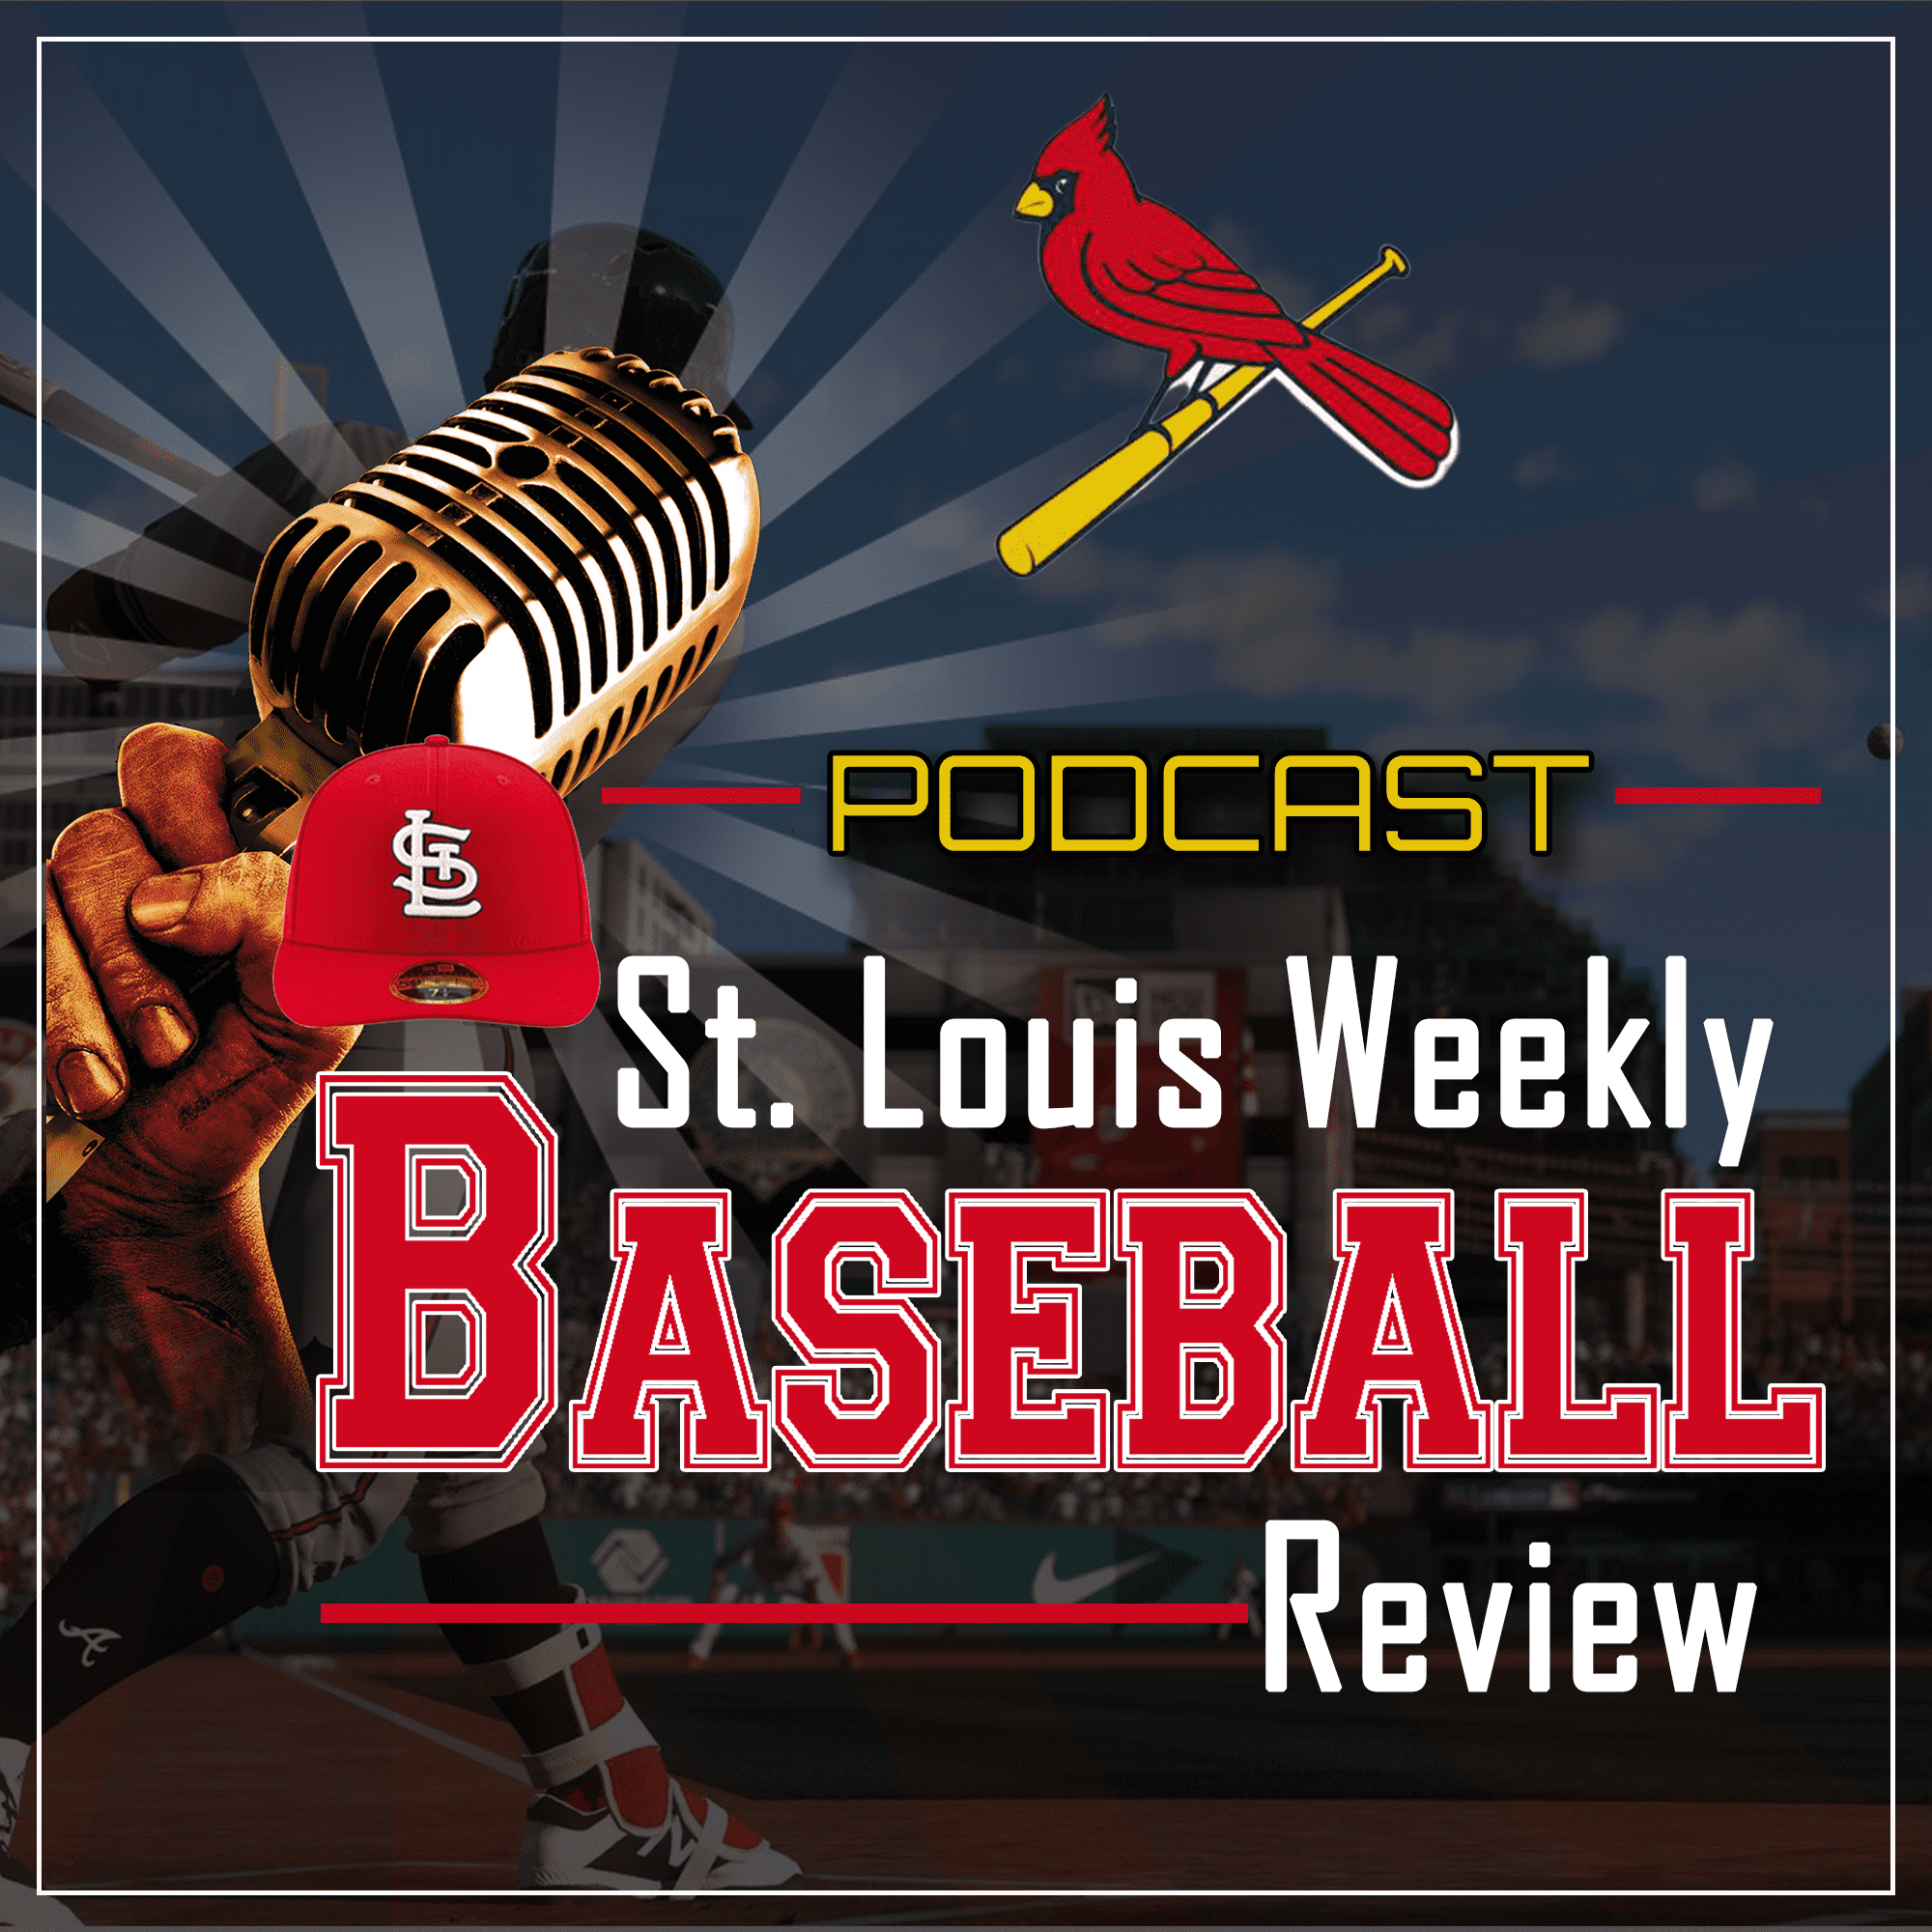 St. Louis Baseball Weekly Review Podcast